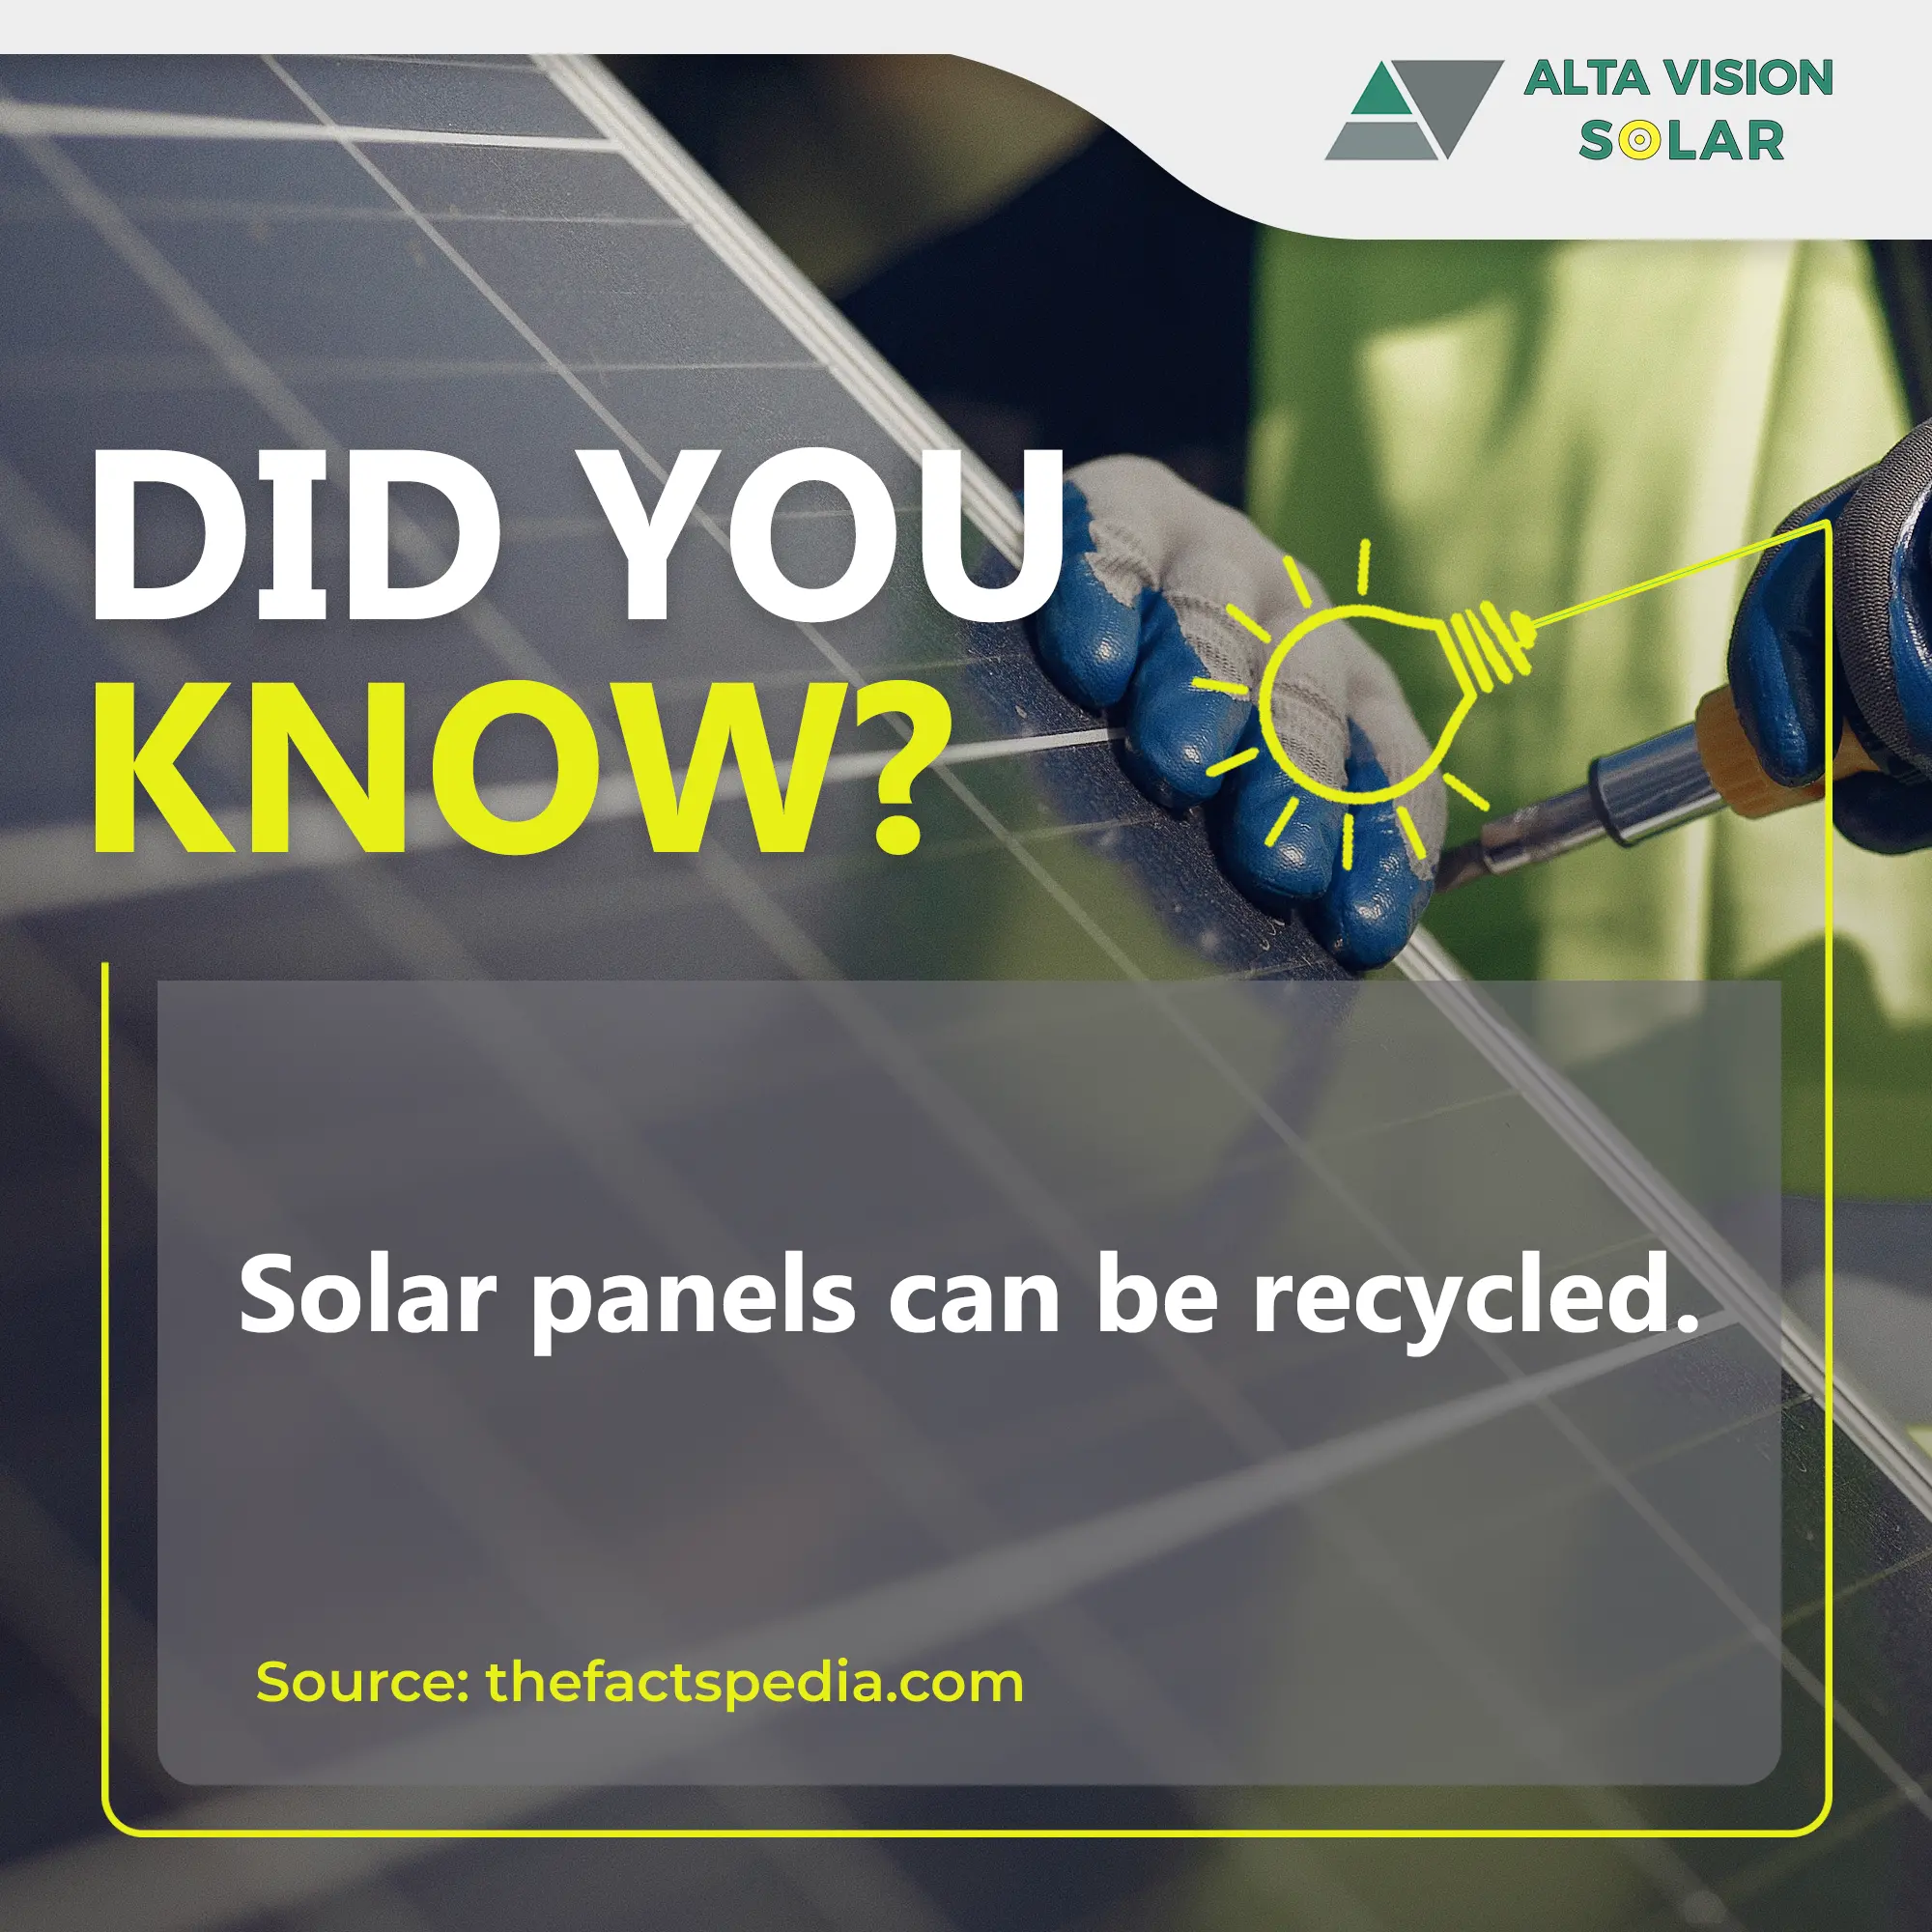 Solar panels can be recycled